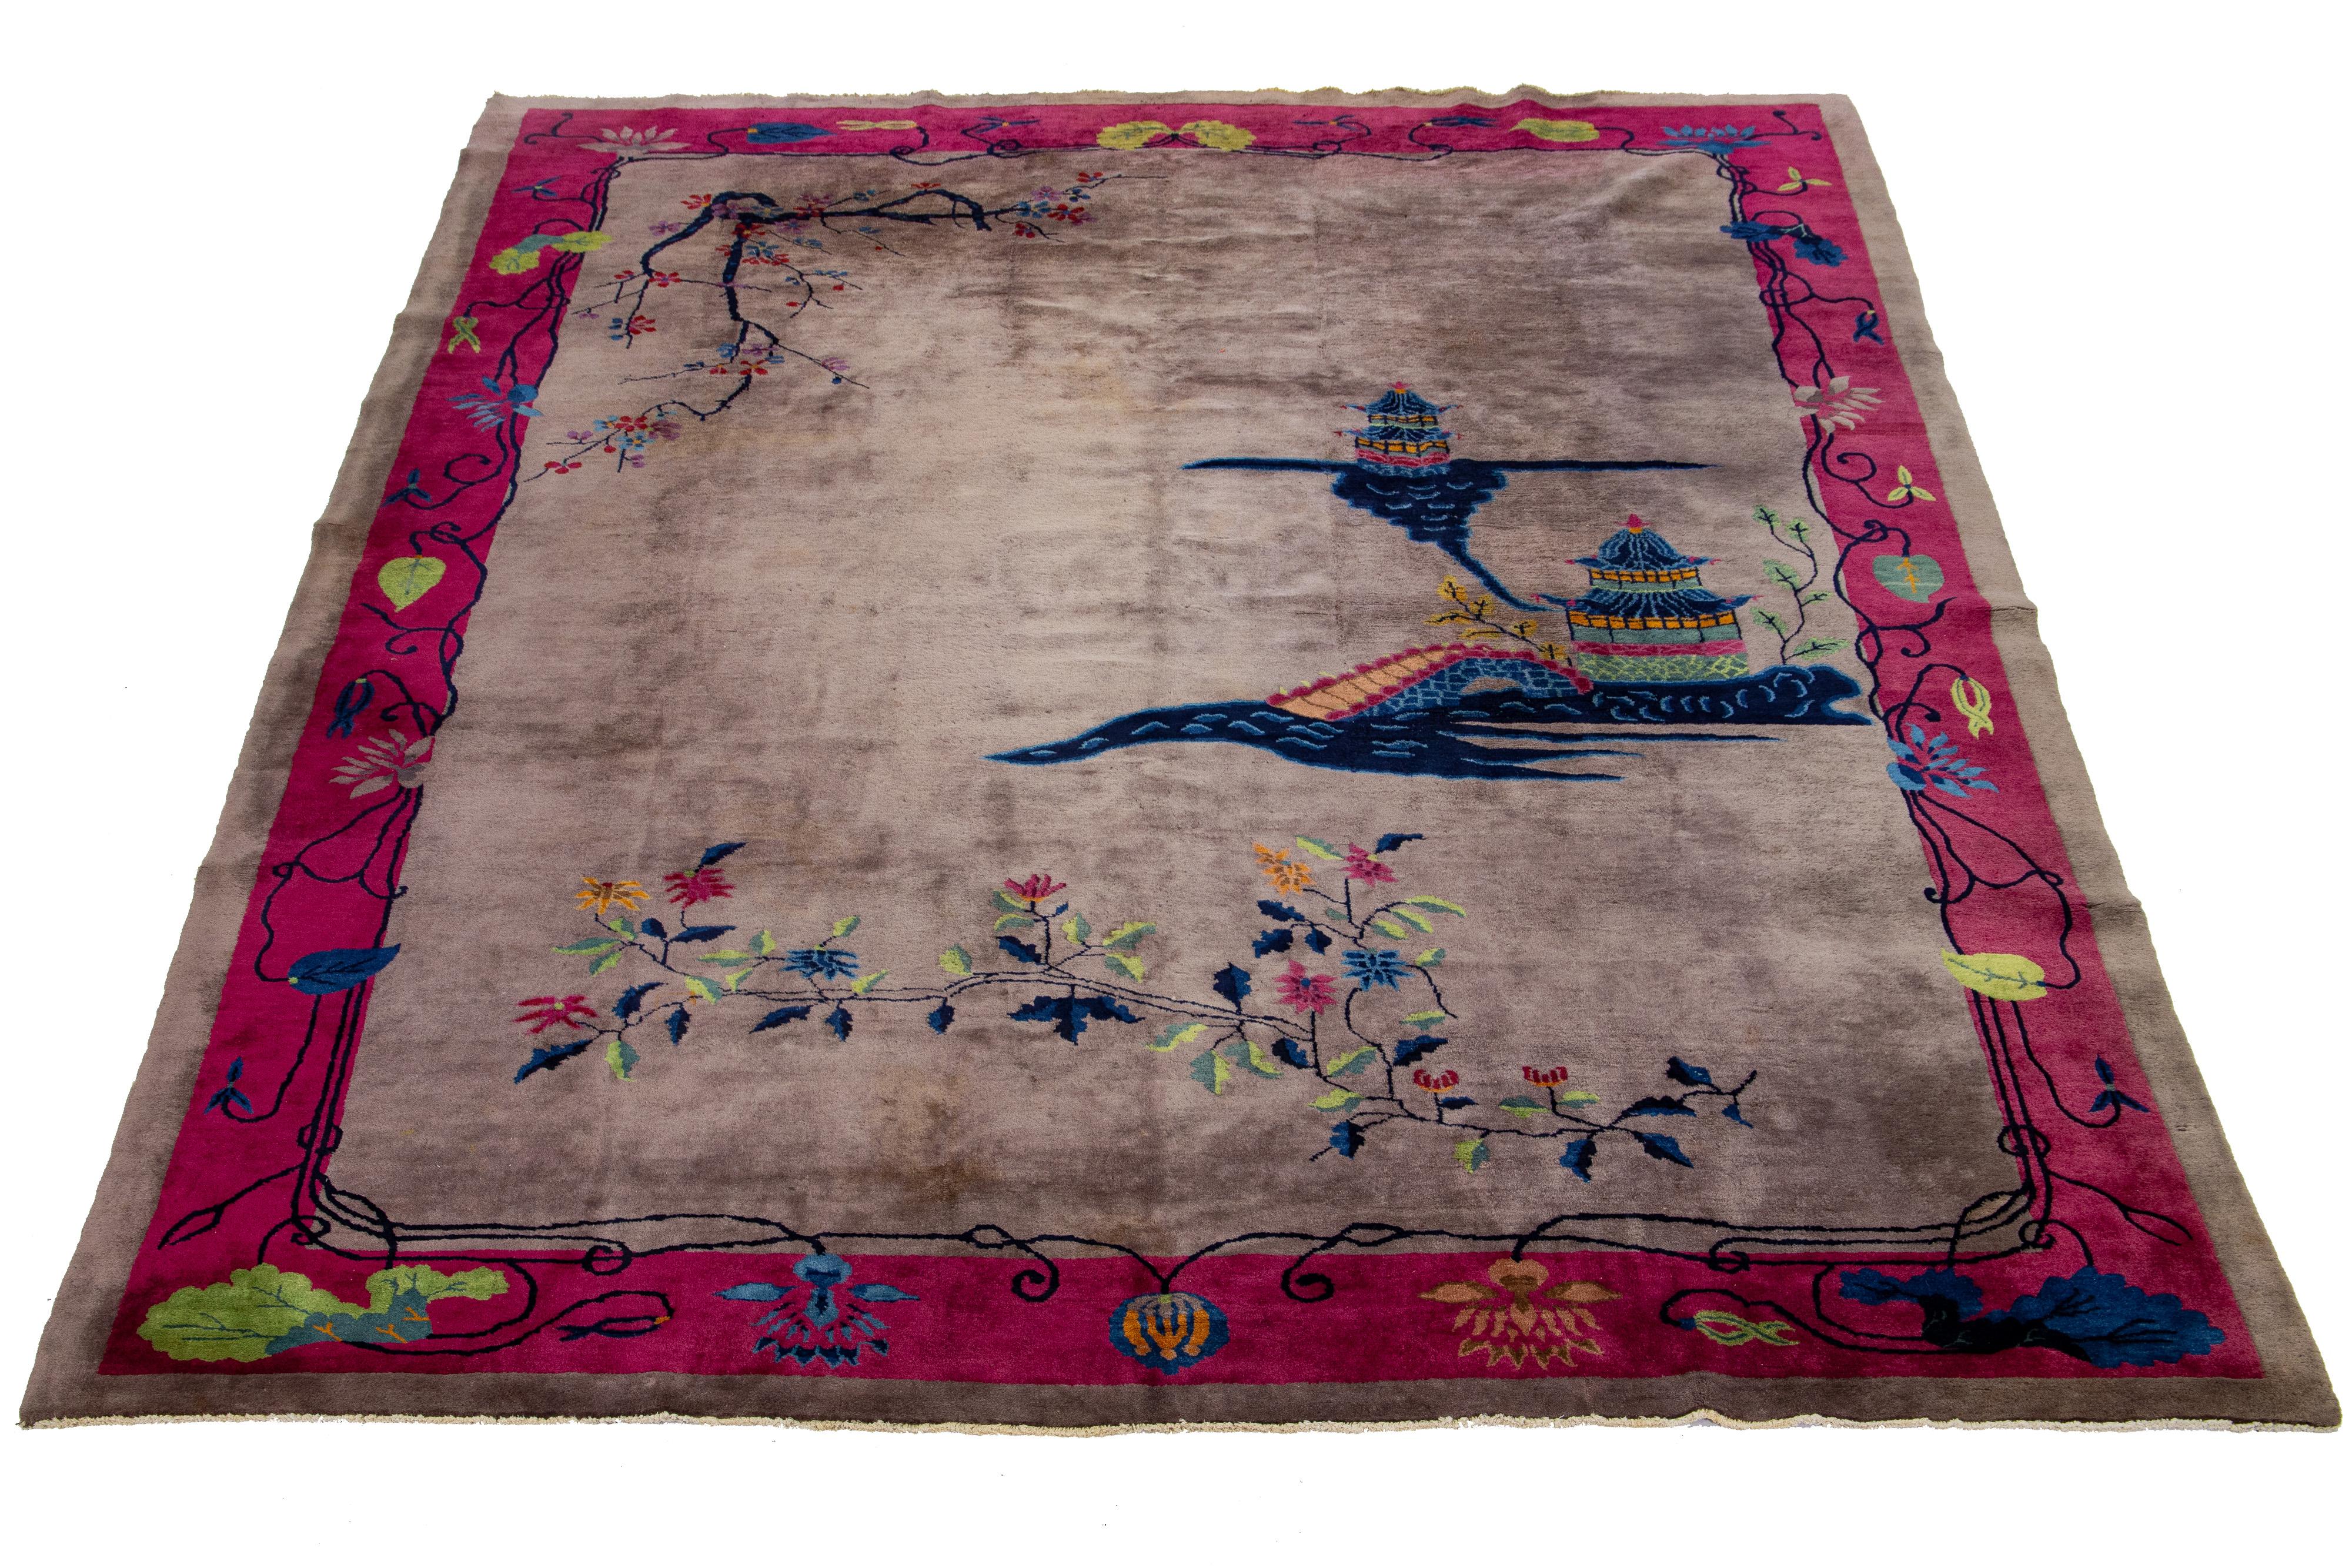 Beautiful antique Chinese Art Deco hand-knotted scatter wool rug with brown and gray color field. This piece has multicolor hues adorned with a classic Chinese floral design.


This rug measures 9' x 11' 6